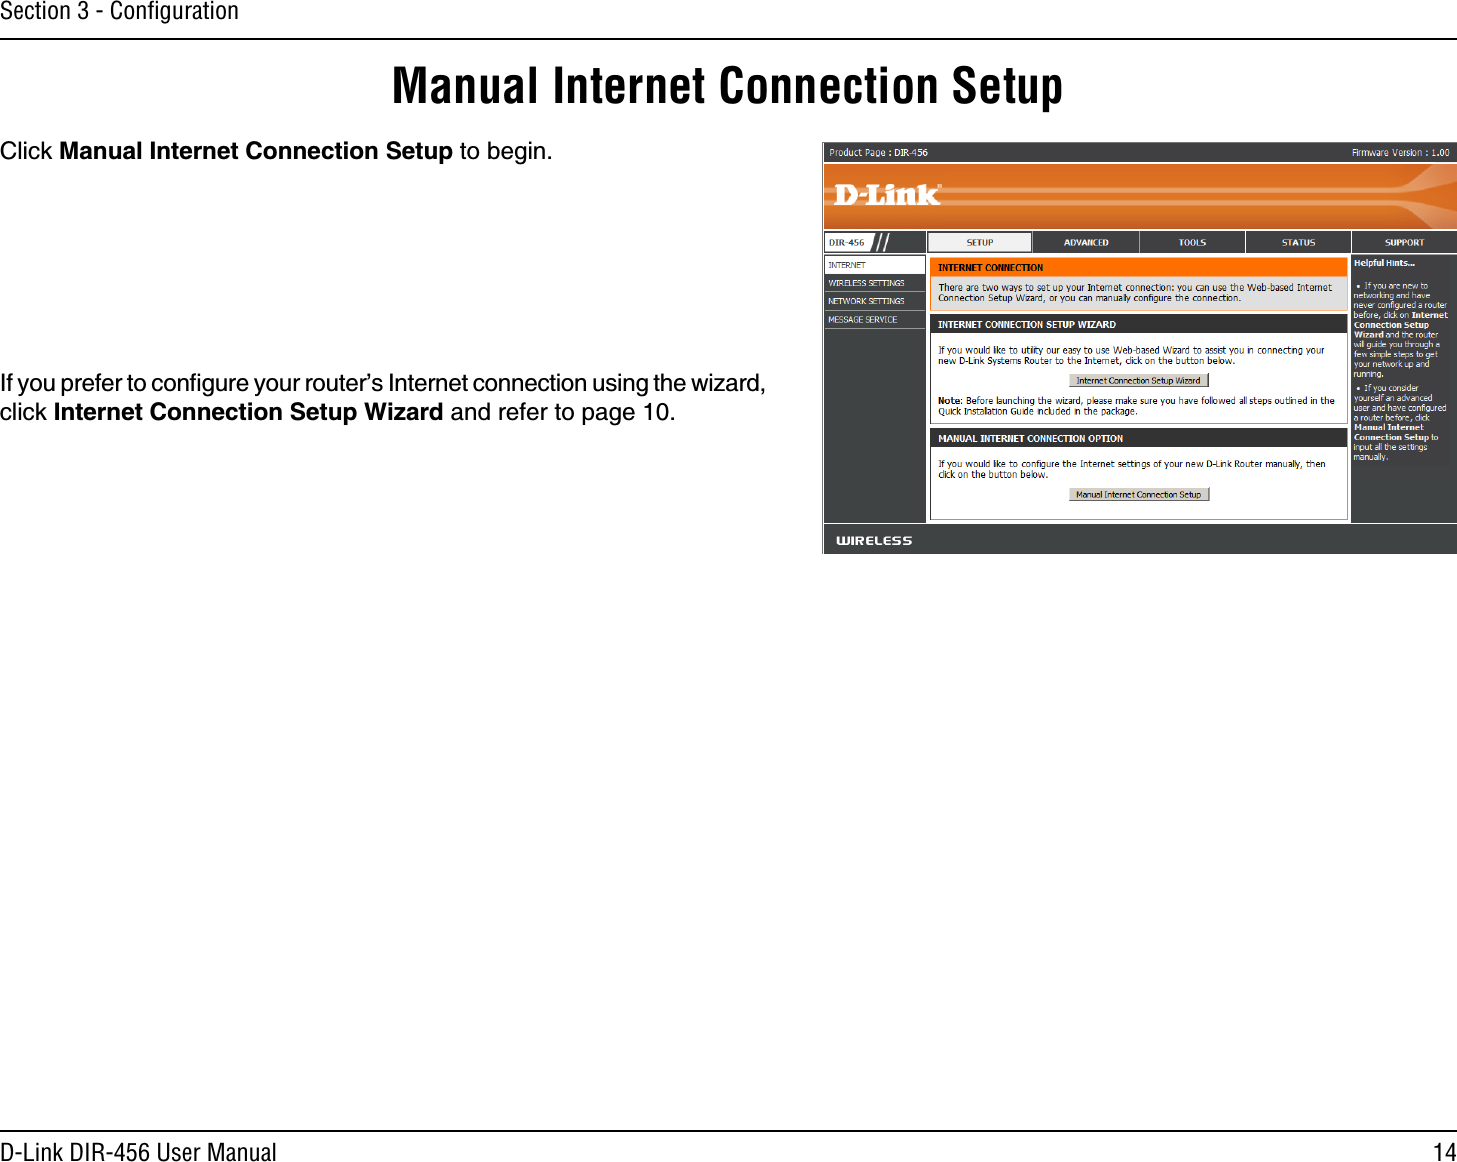 14D-Link DIR-456 User ManualSection 3 - ConﬁgurationManual Internet Connection SetupClick Manual Internet Connection Setup to begin.If you prefer to conﬁgure your router’s Internet connection using the wizard, click Internet Connection Setup Wizard and refer to page 10.